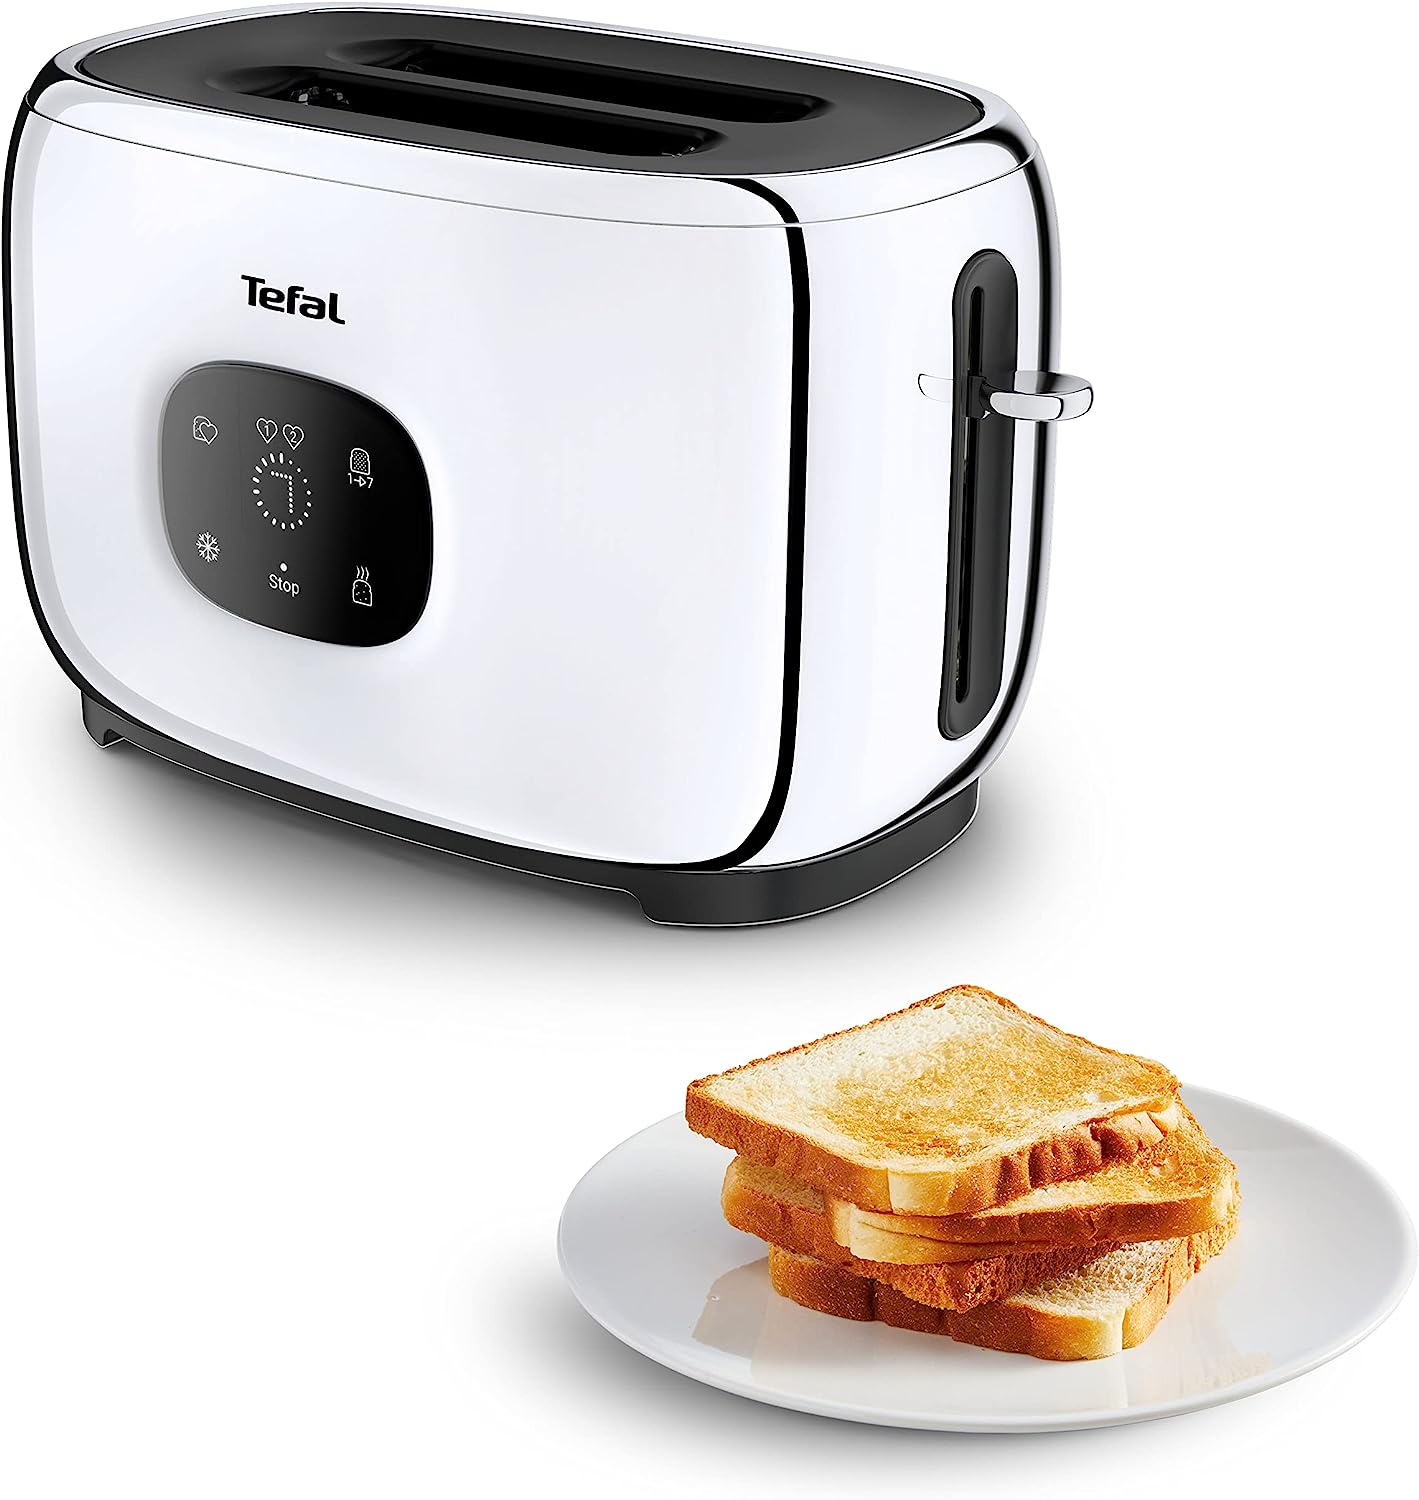 Tefal TT883D Majestuo Double Slot Toaster | Touch screen display | 2 personalized shortcuts | 1050 watts | Lifting Device | Defrost and Warm Function | Stop button | Stainless Steel/Black